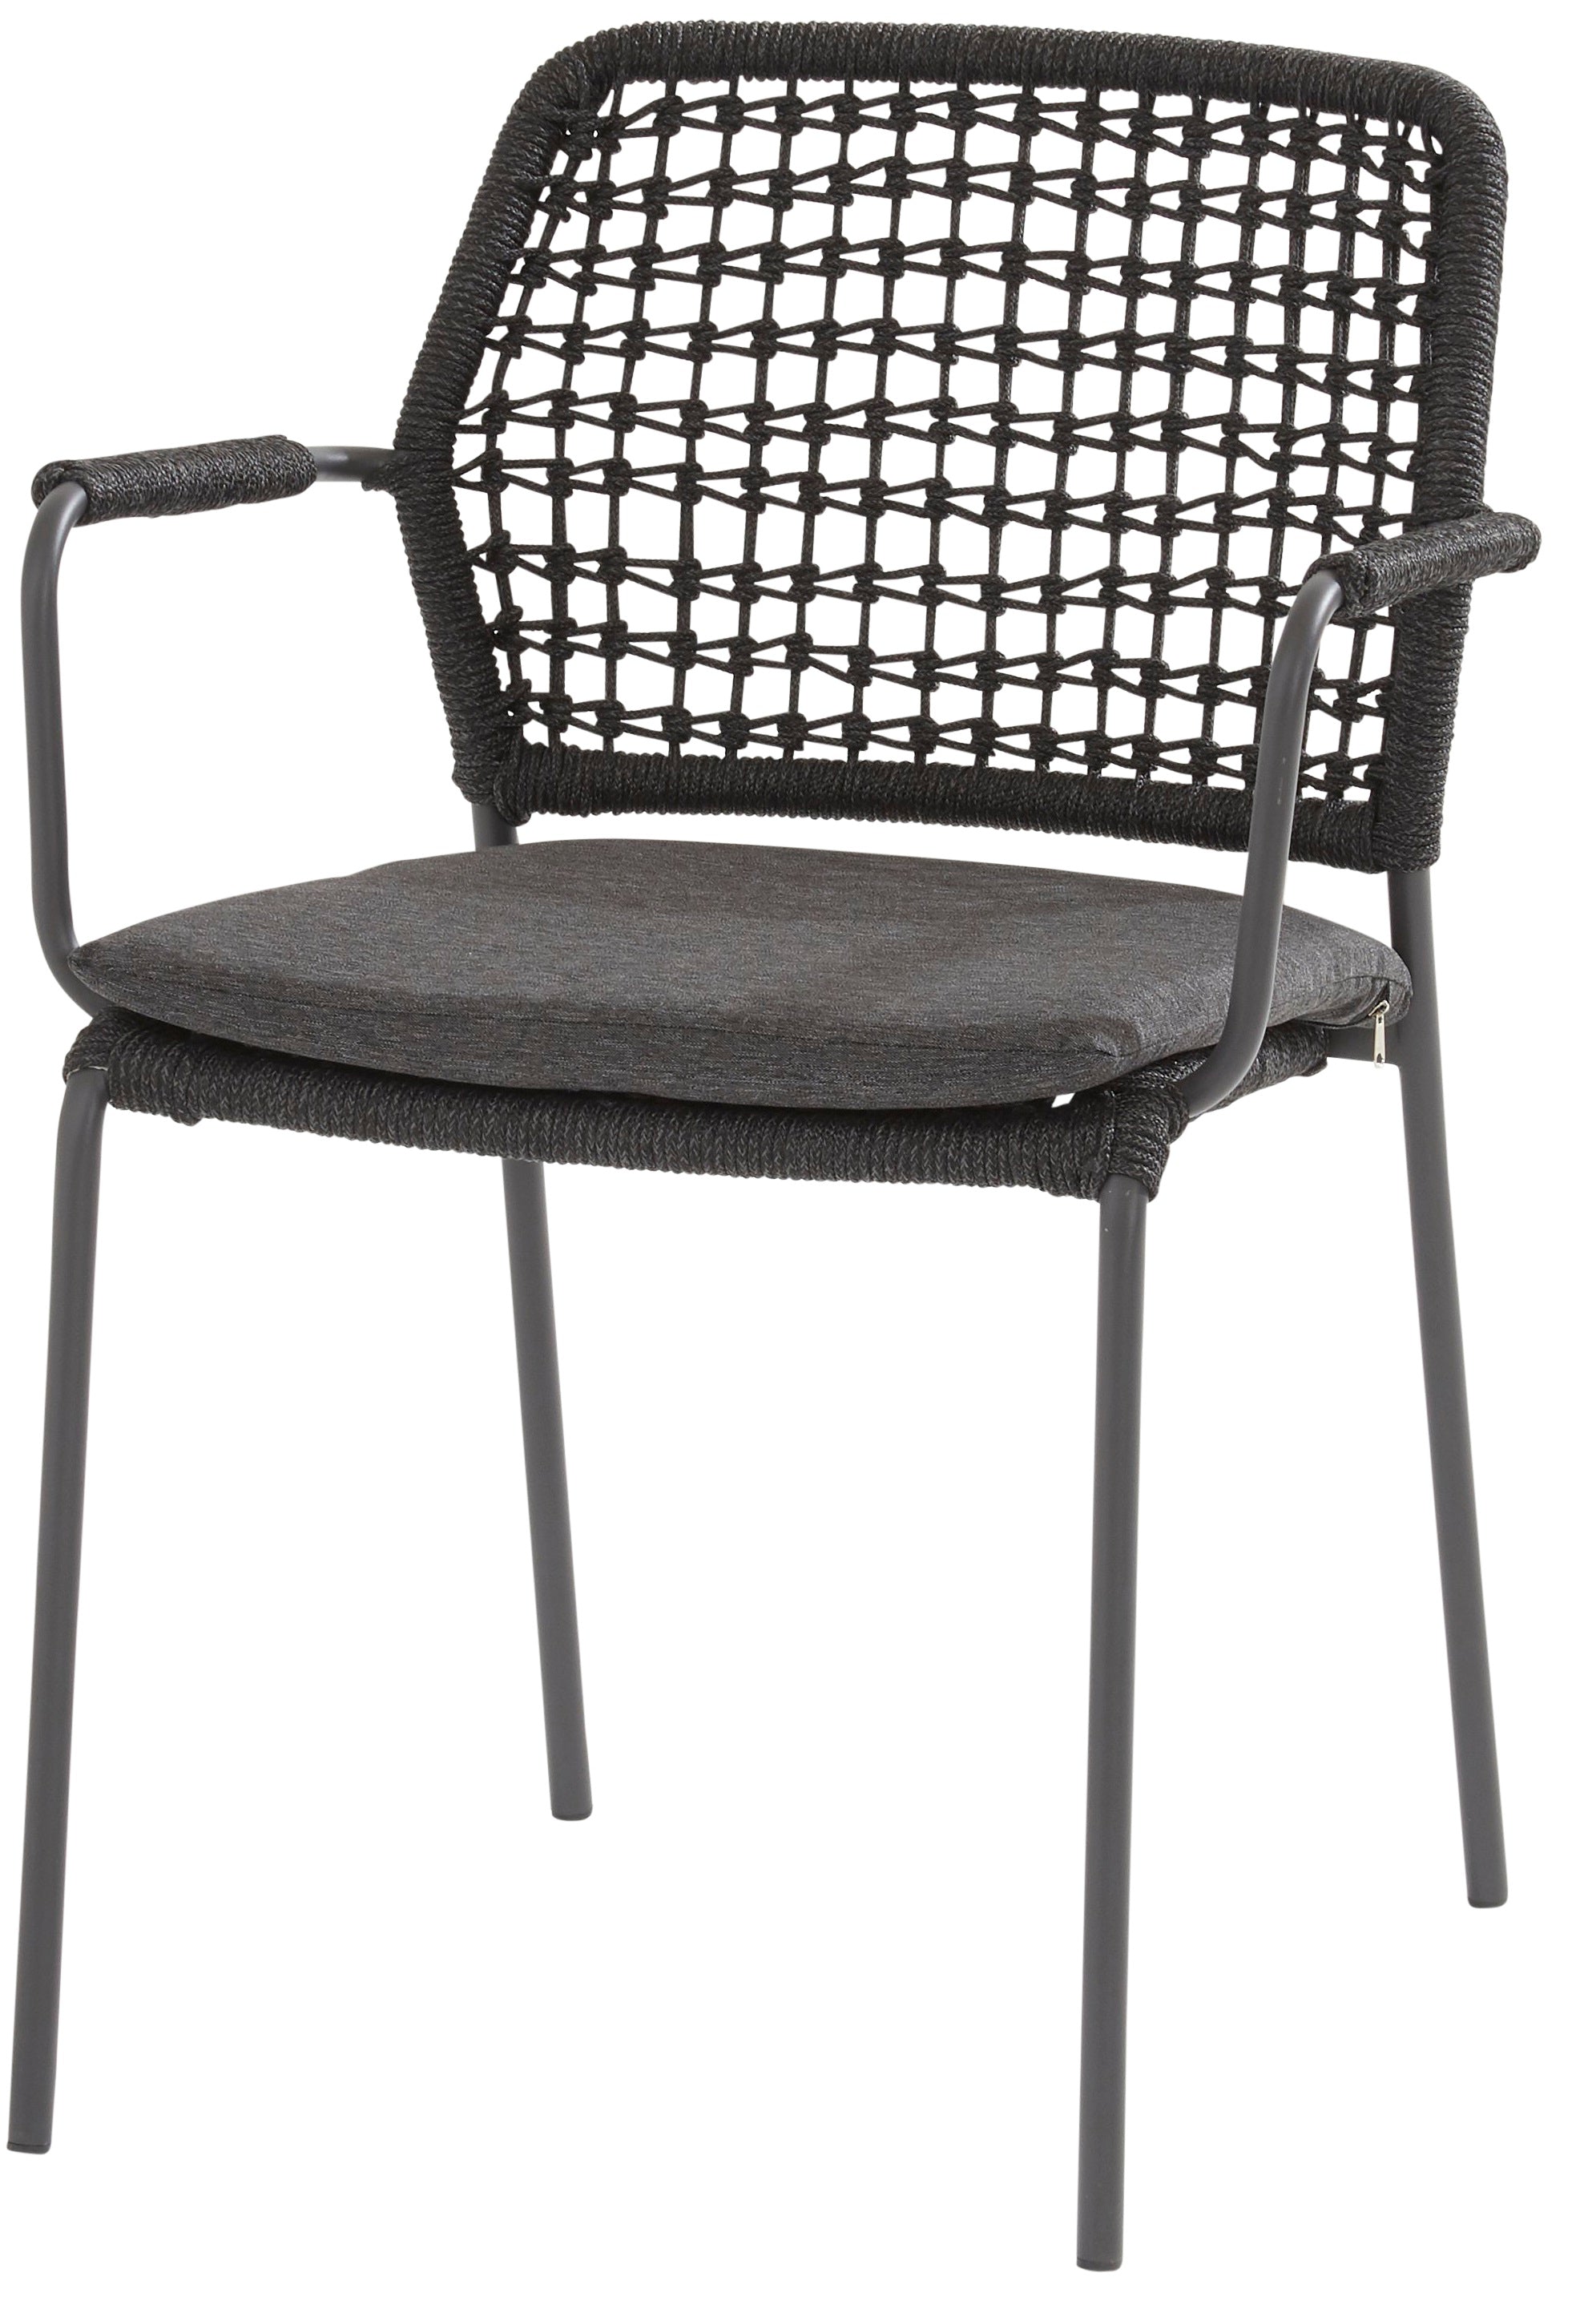 4 Seasons Outdoor Barista Stacking Dining Chair With Cushion (Packed In 6's)